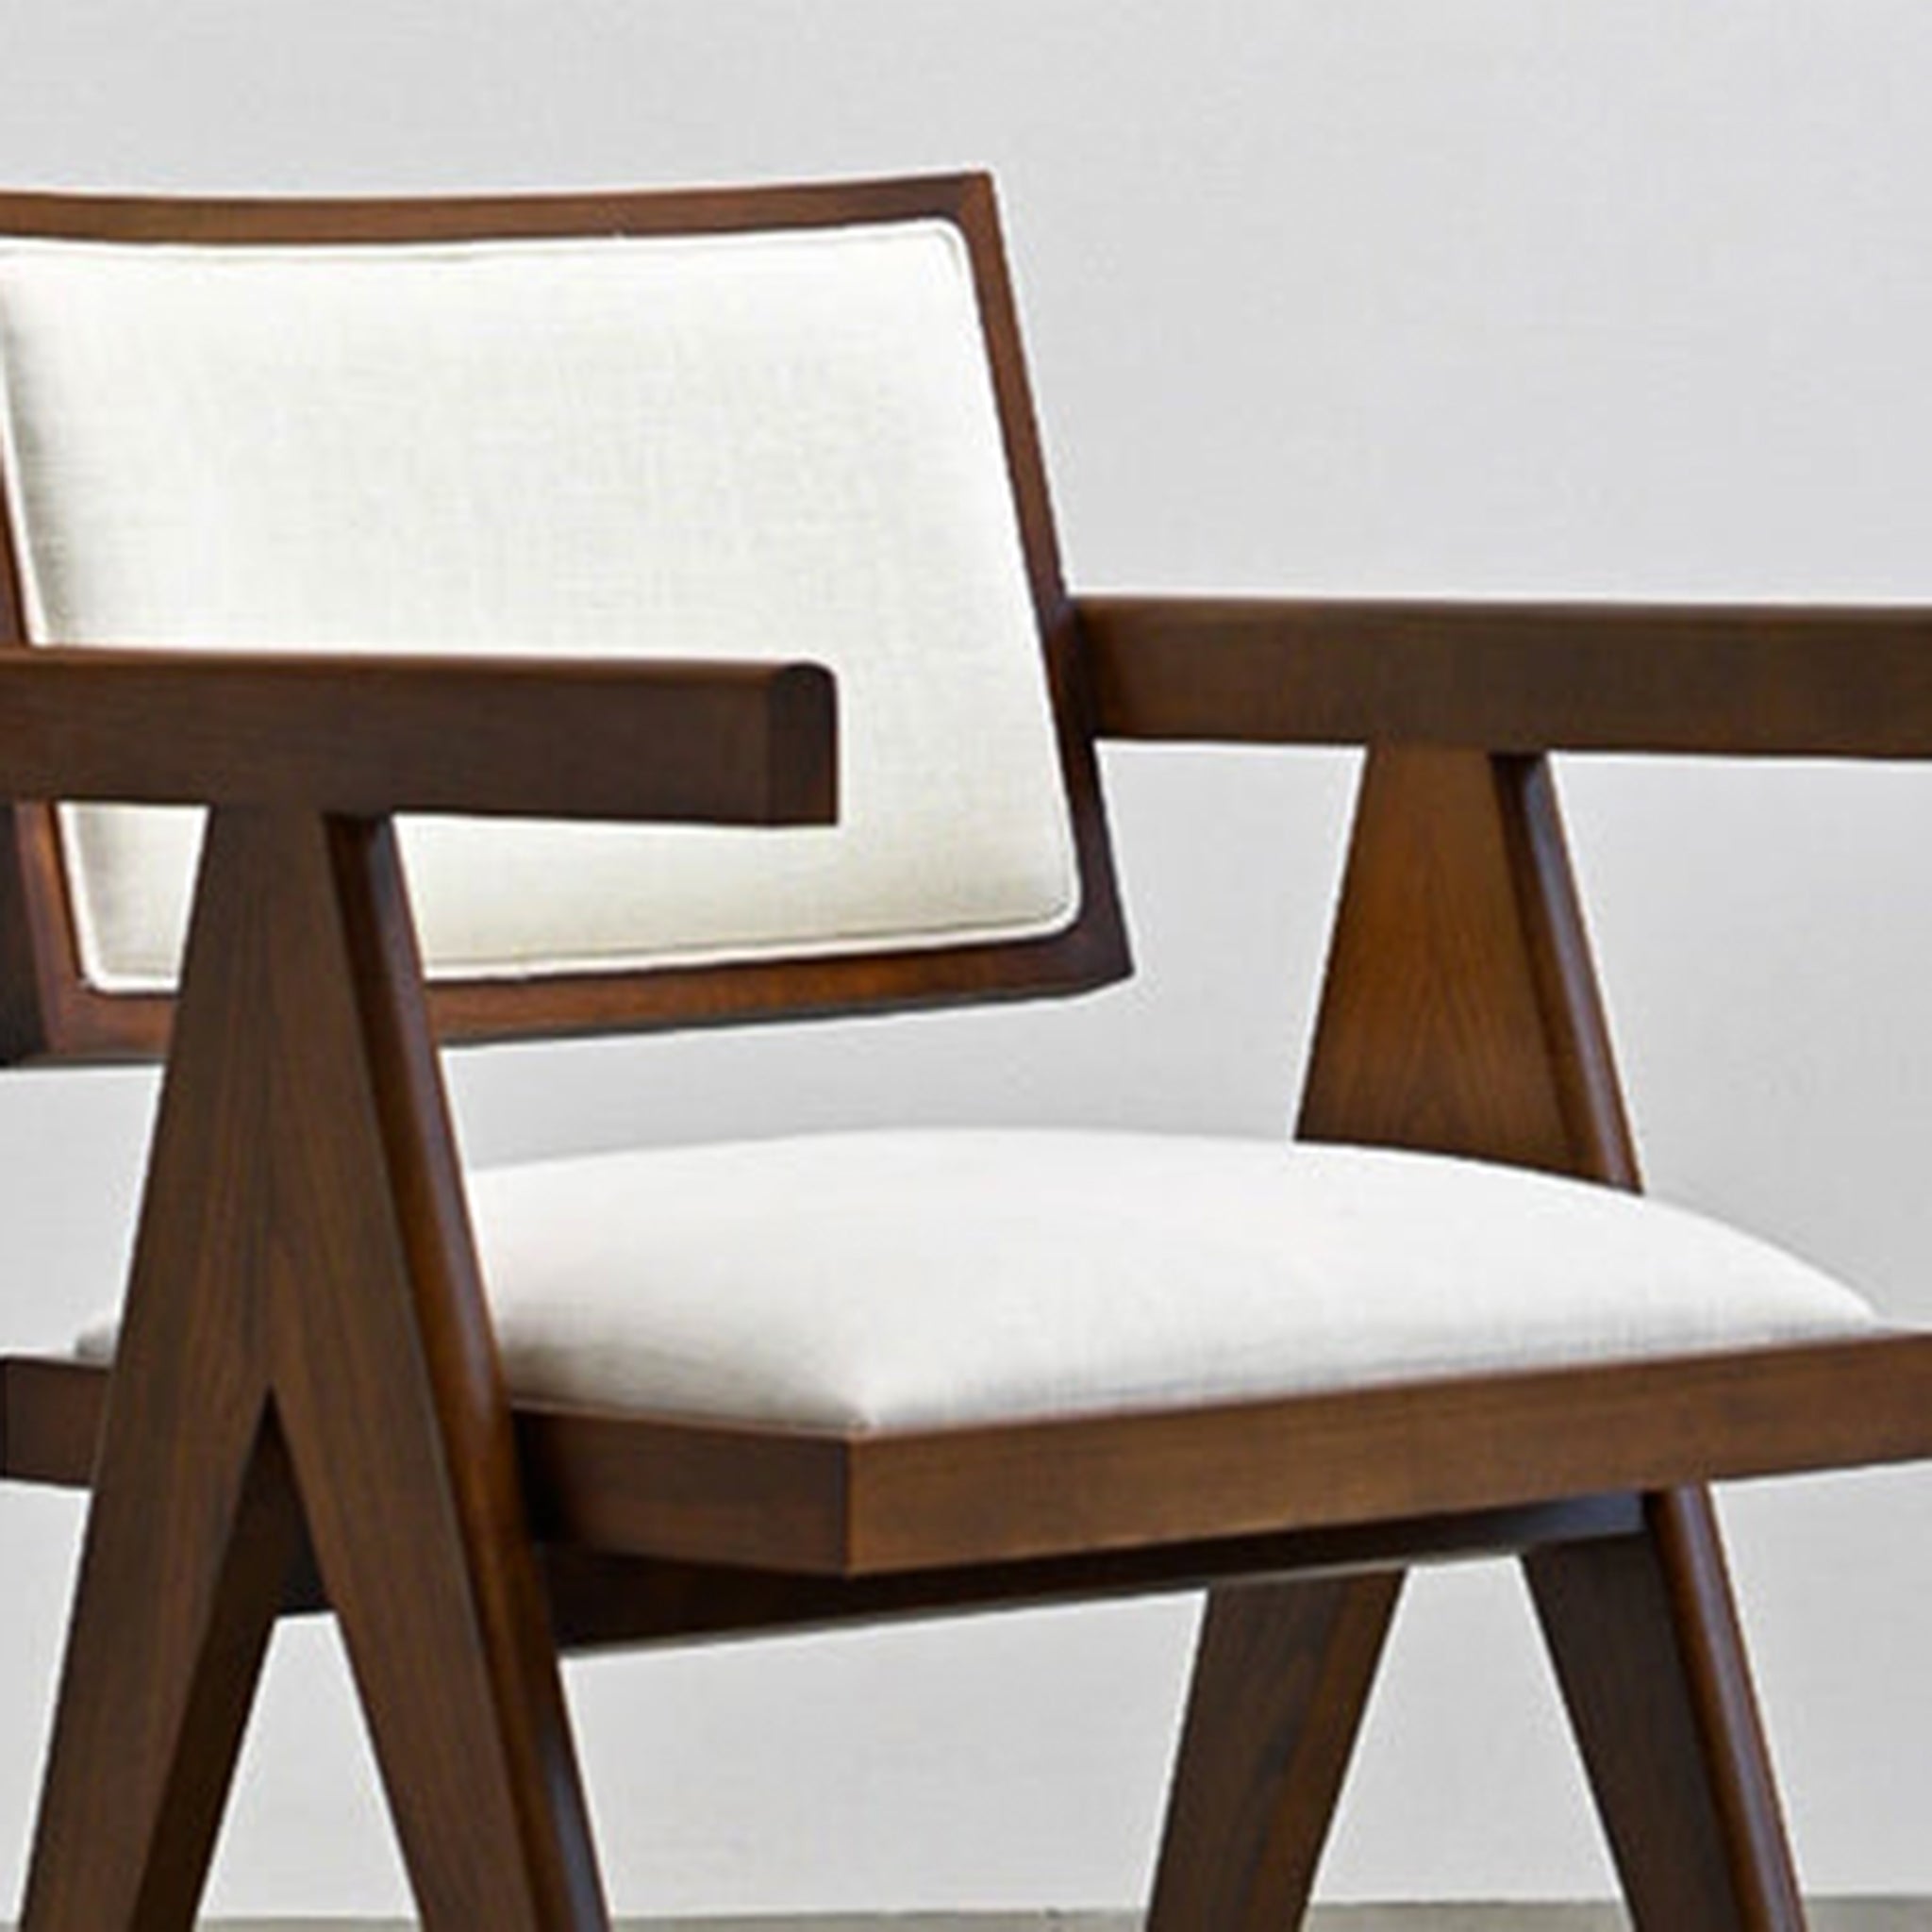 "Elegant side profile of The Pierre Dining Chair with light fabric cushions."